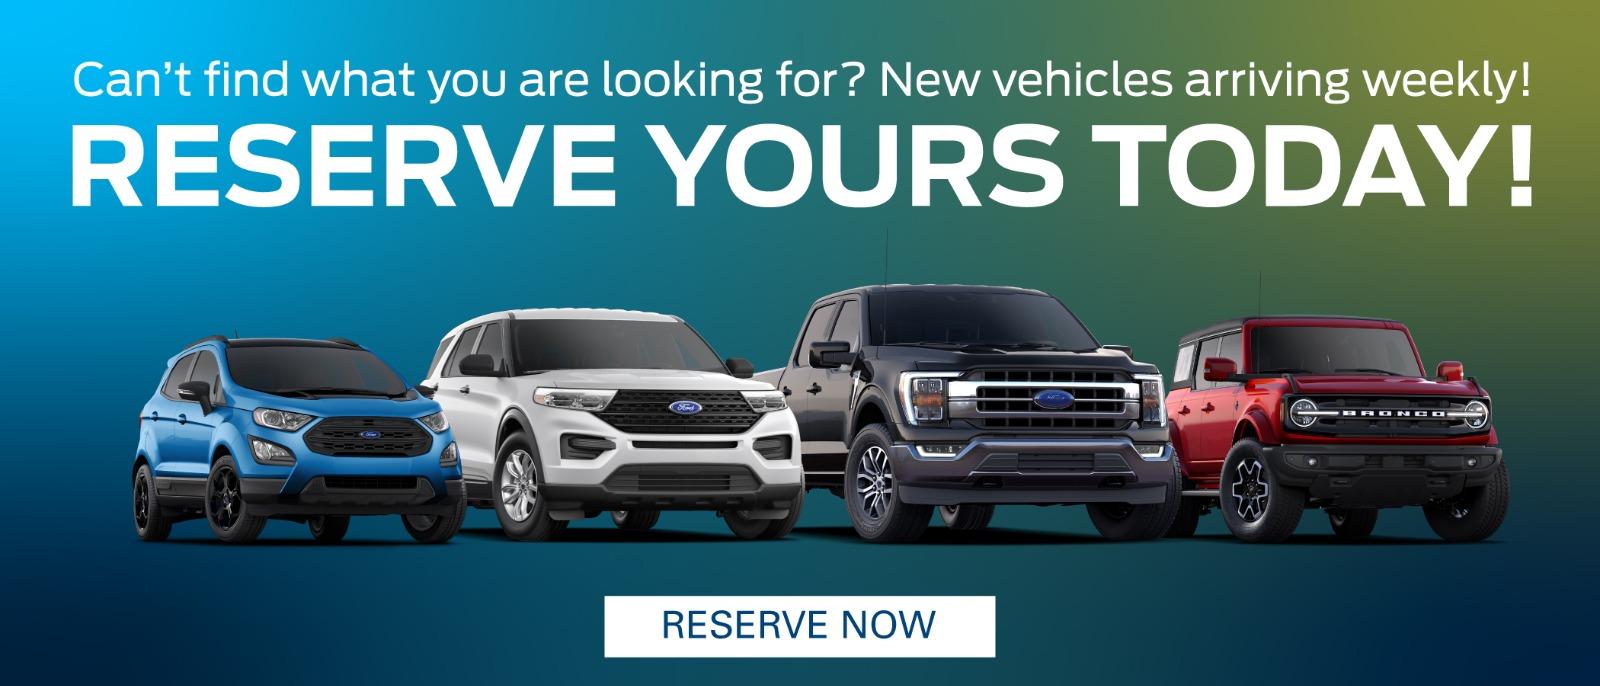 Reserve Your Vehicle